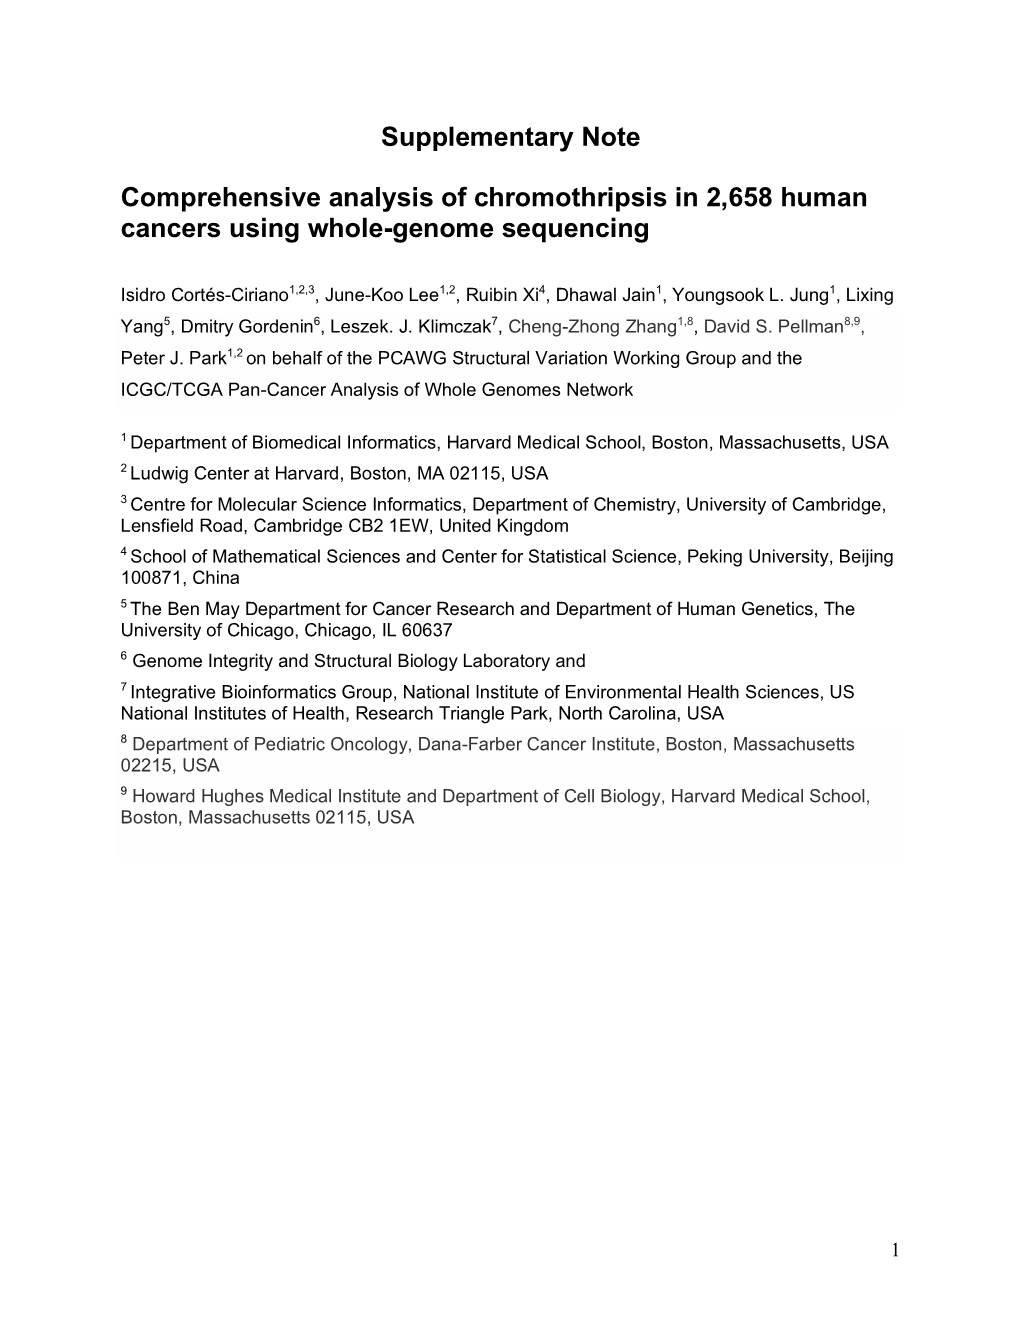 Supplementary Note Comprehensive Analysis of Chromothripsis in 2,658